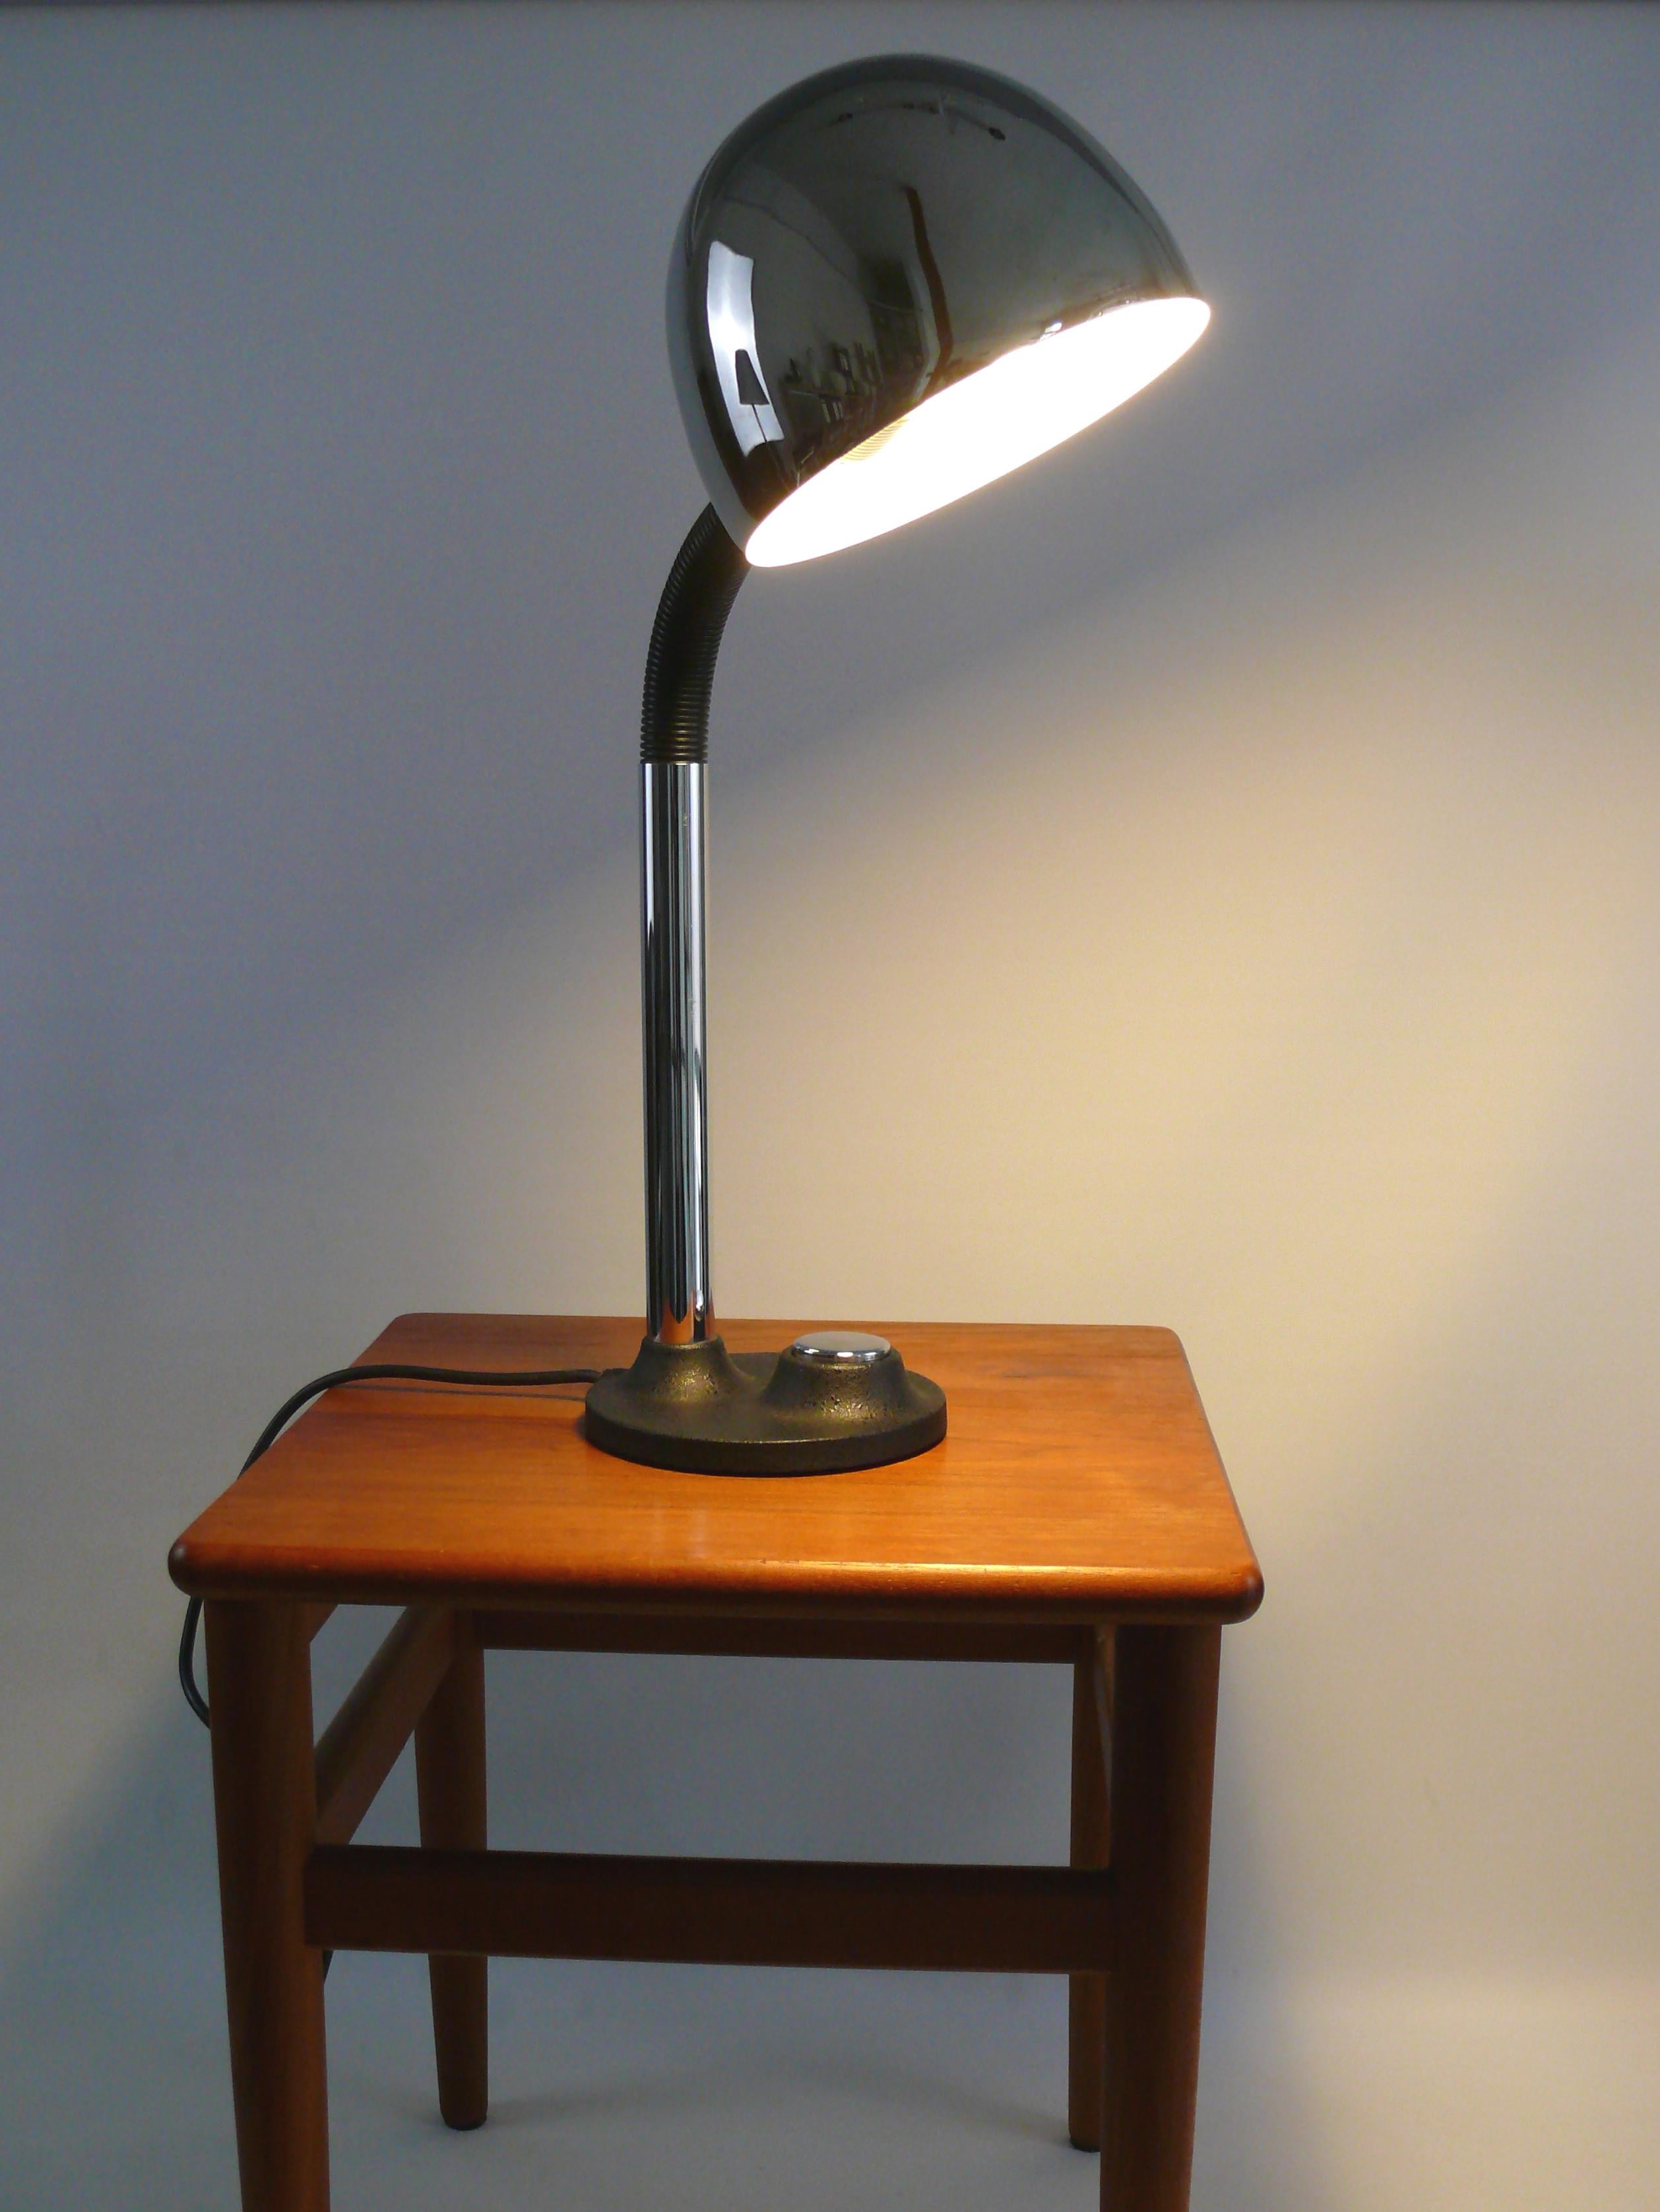 Very well preserved, large desk lamp from the 1960s - 1970s by Egon Hillebrand. The lamp is made of black painted metal and chrome-plated elements as well as a plastic-coated gooseneck. The desk lamp is very solidly made and the large shade provides